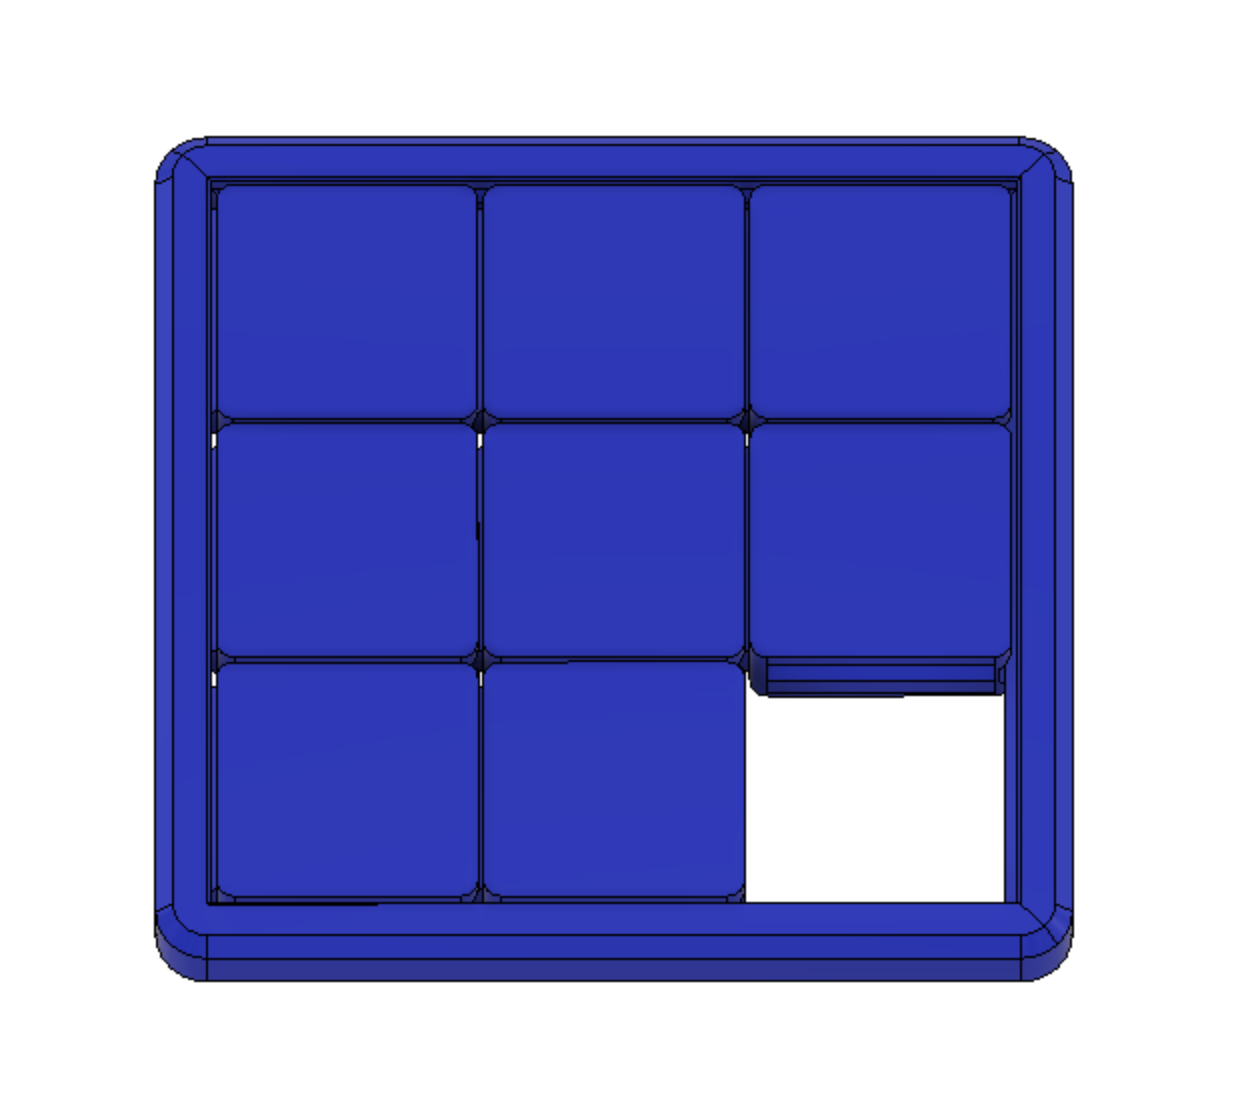 numbered-tile-puzzle-by-jfarrell-download-free-stl-model-printables